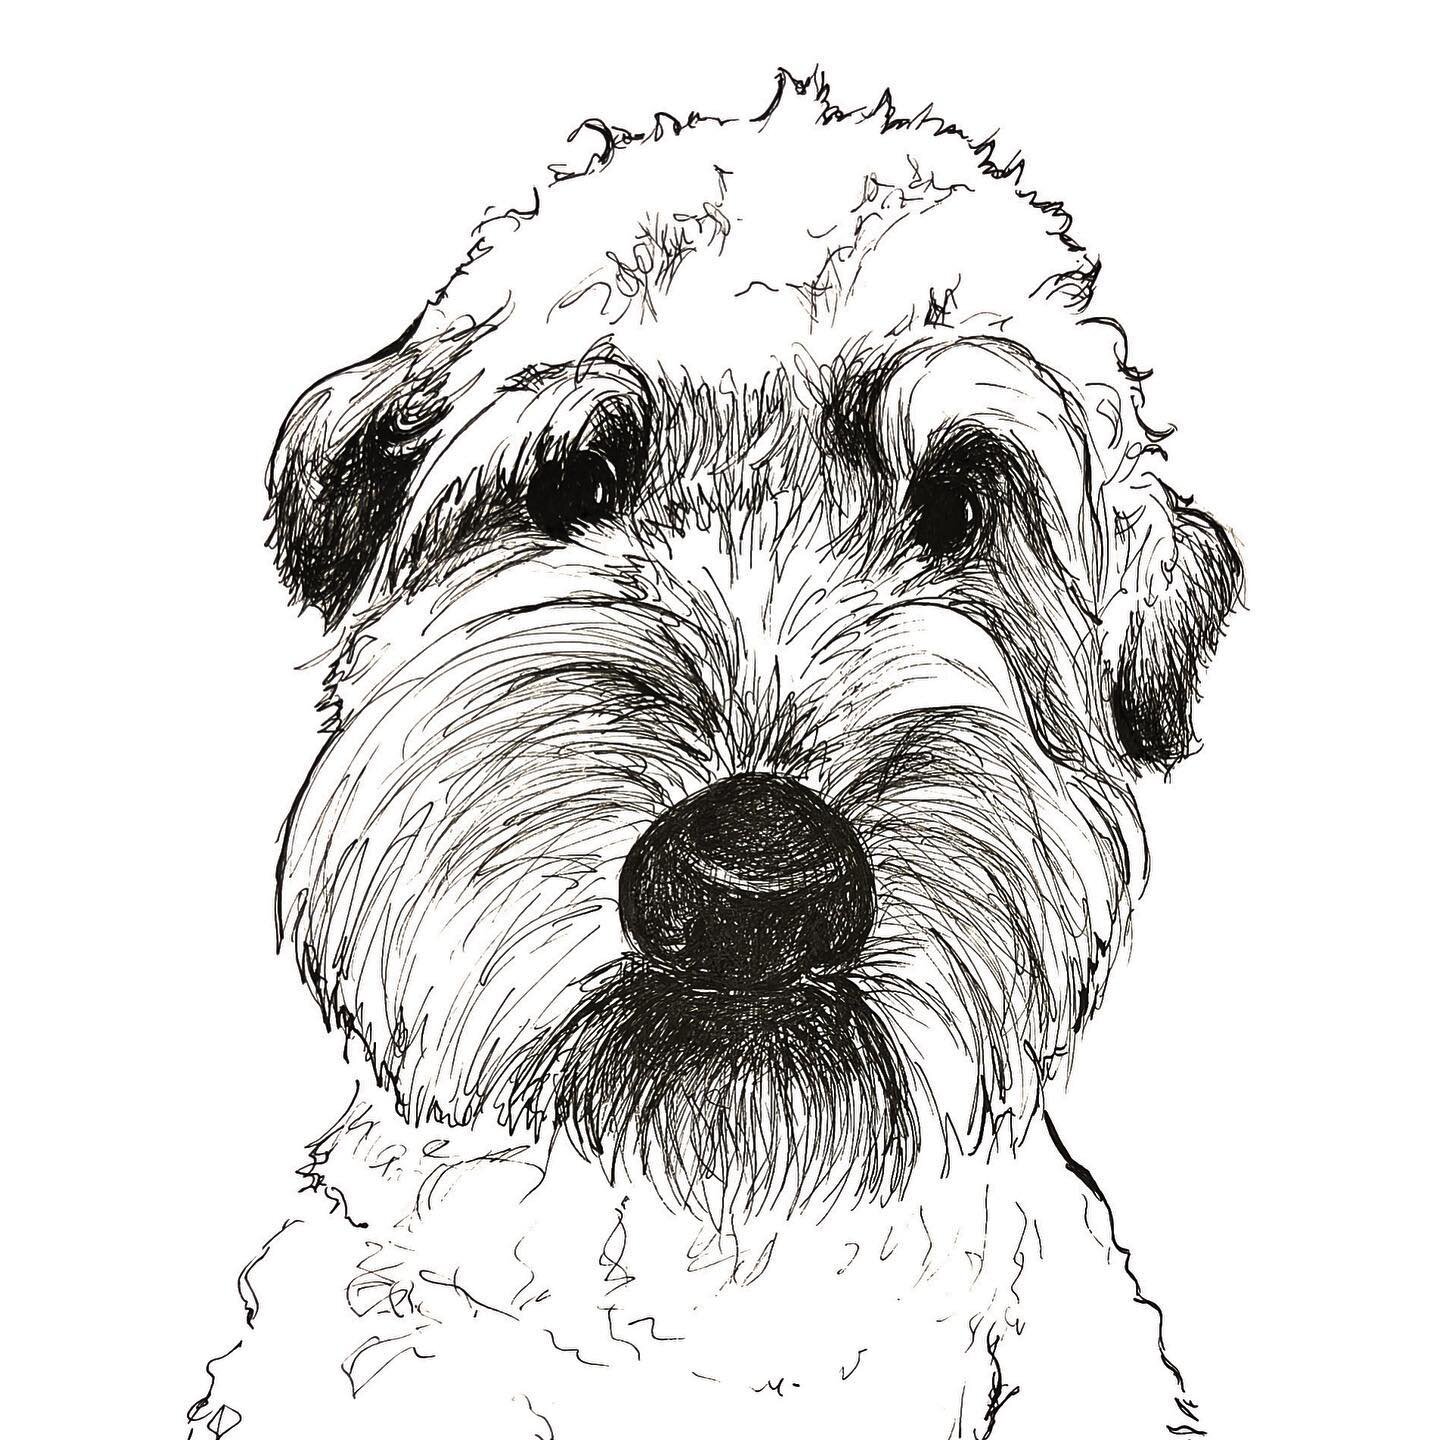 Fluffy pup! This was a fun Fetch-a-Sketch to work on. I especially live his eyebrows!
.
.
.
.
.
.
.
.
.
.
.
.
.
#fetchasketch #petportraits #inkdrawing #digitalfetchasketch #giftideas #2022highlights #artlife